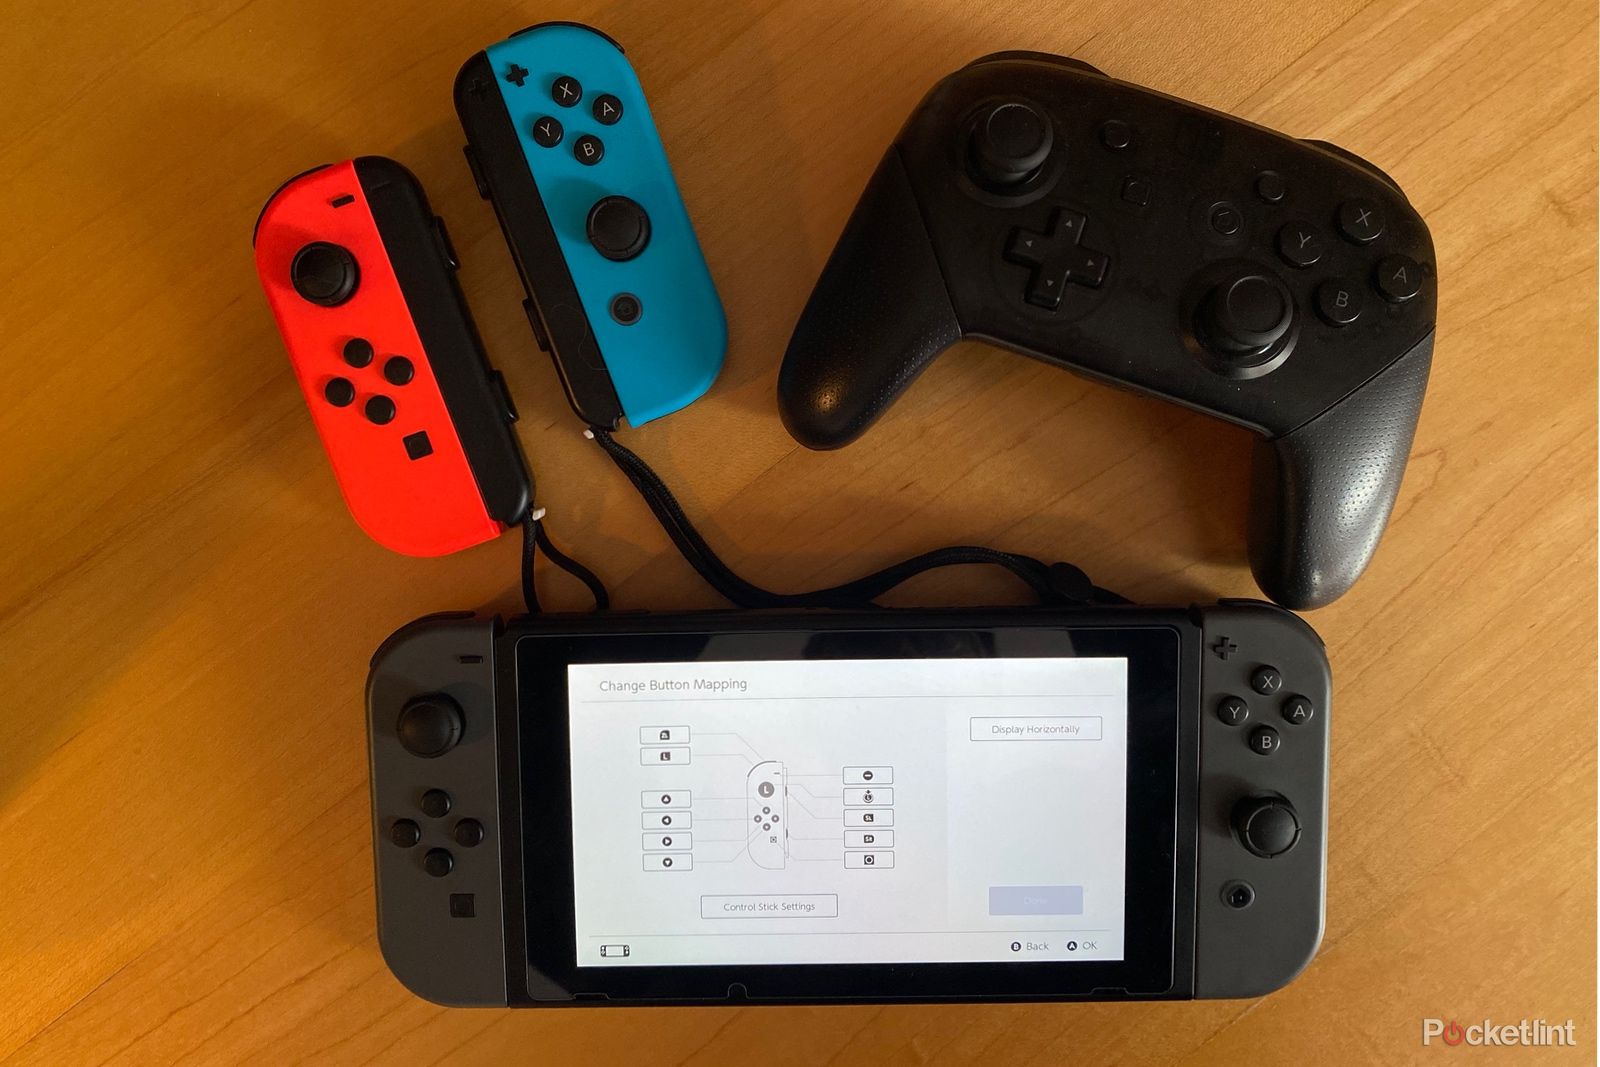 How to remap the buttons on your Nintendo Switch controllers